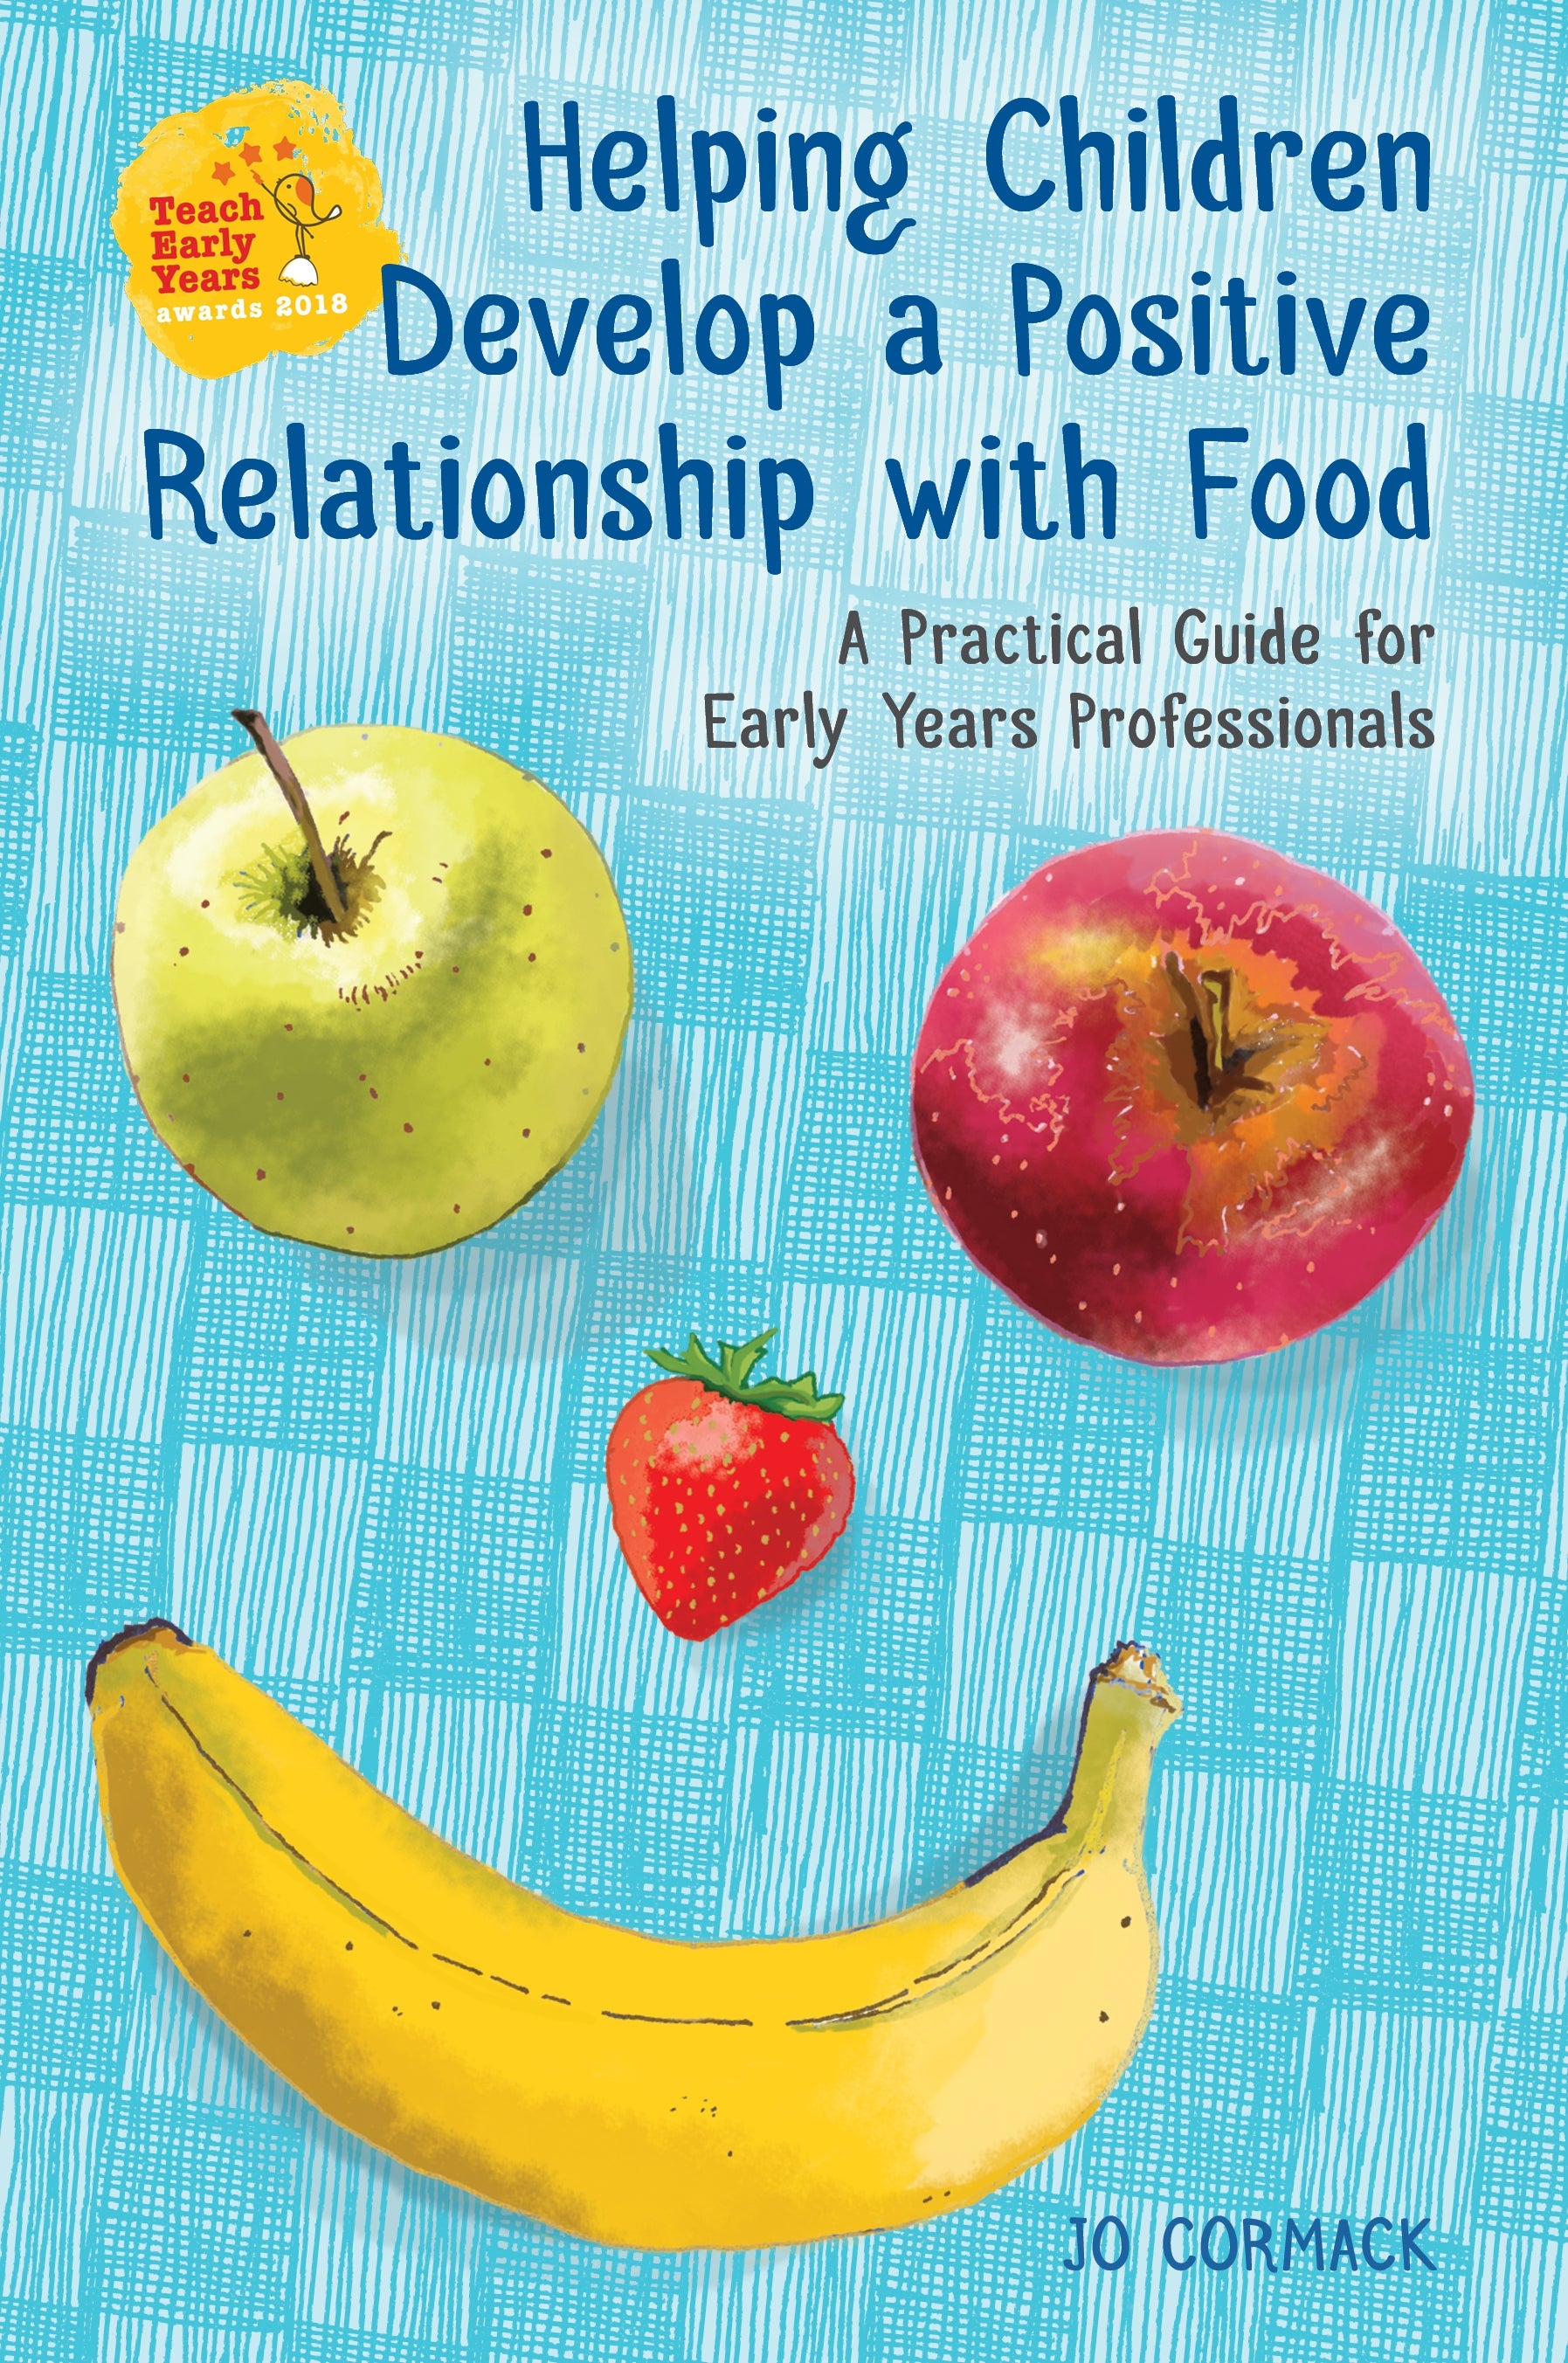 Helping Children Develop a Positive Relationship with Food by Jo Cormack